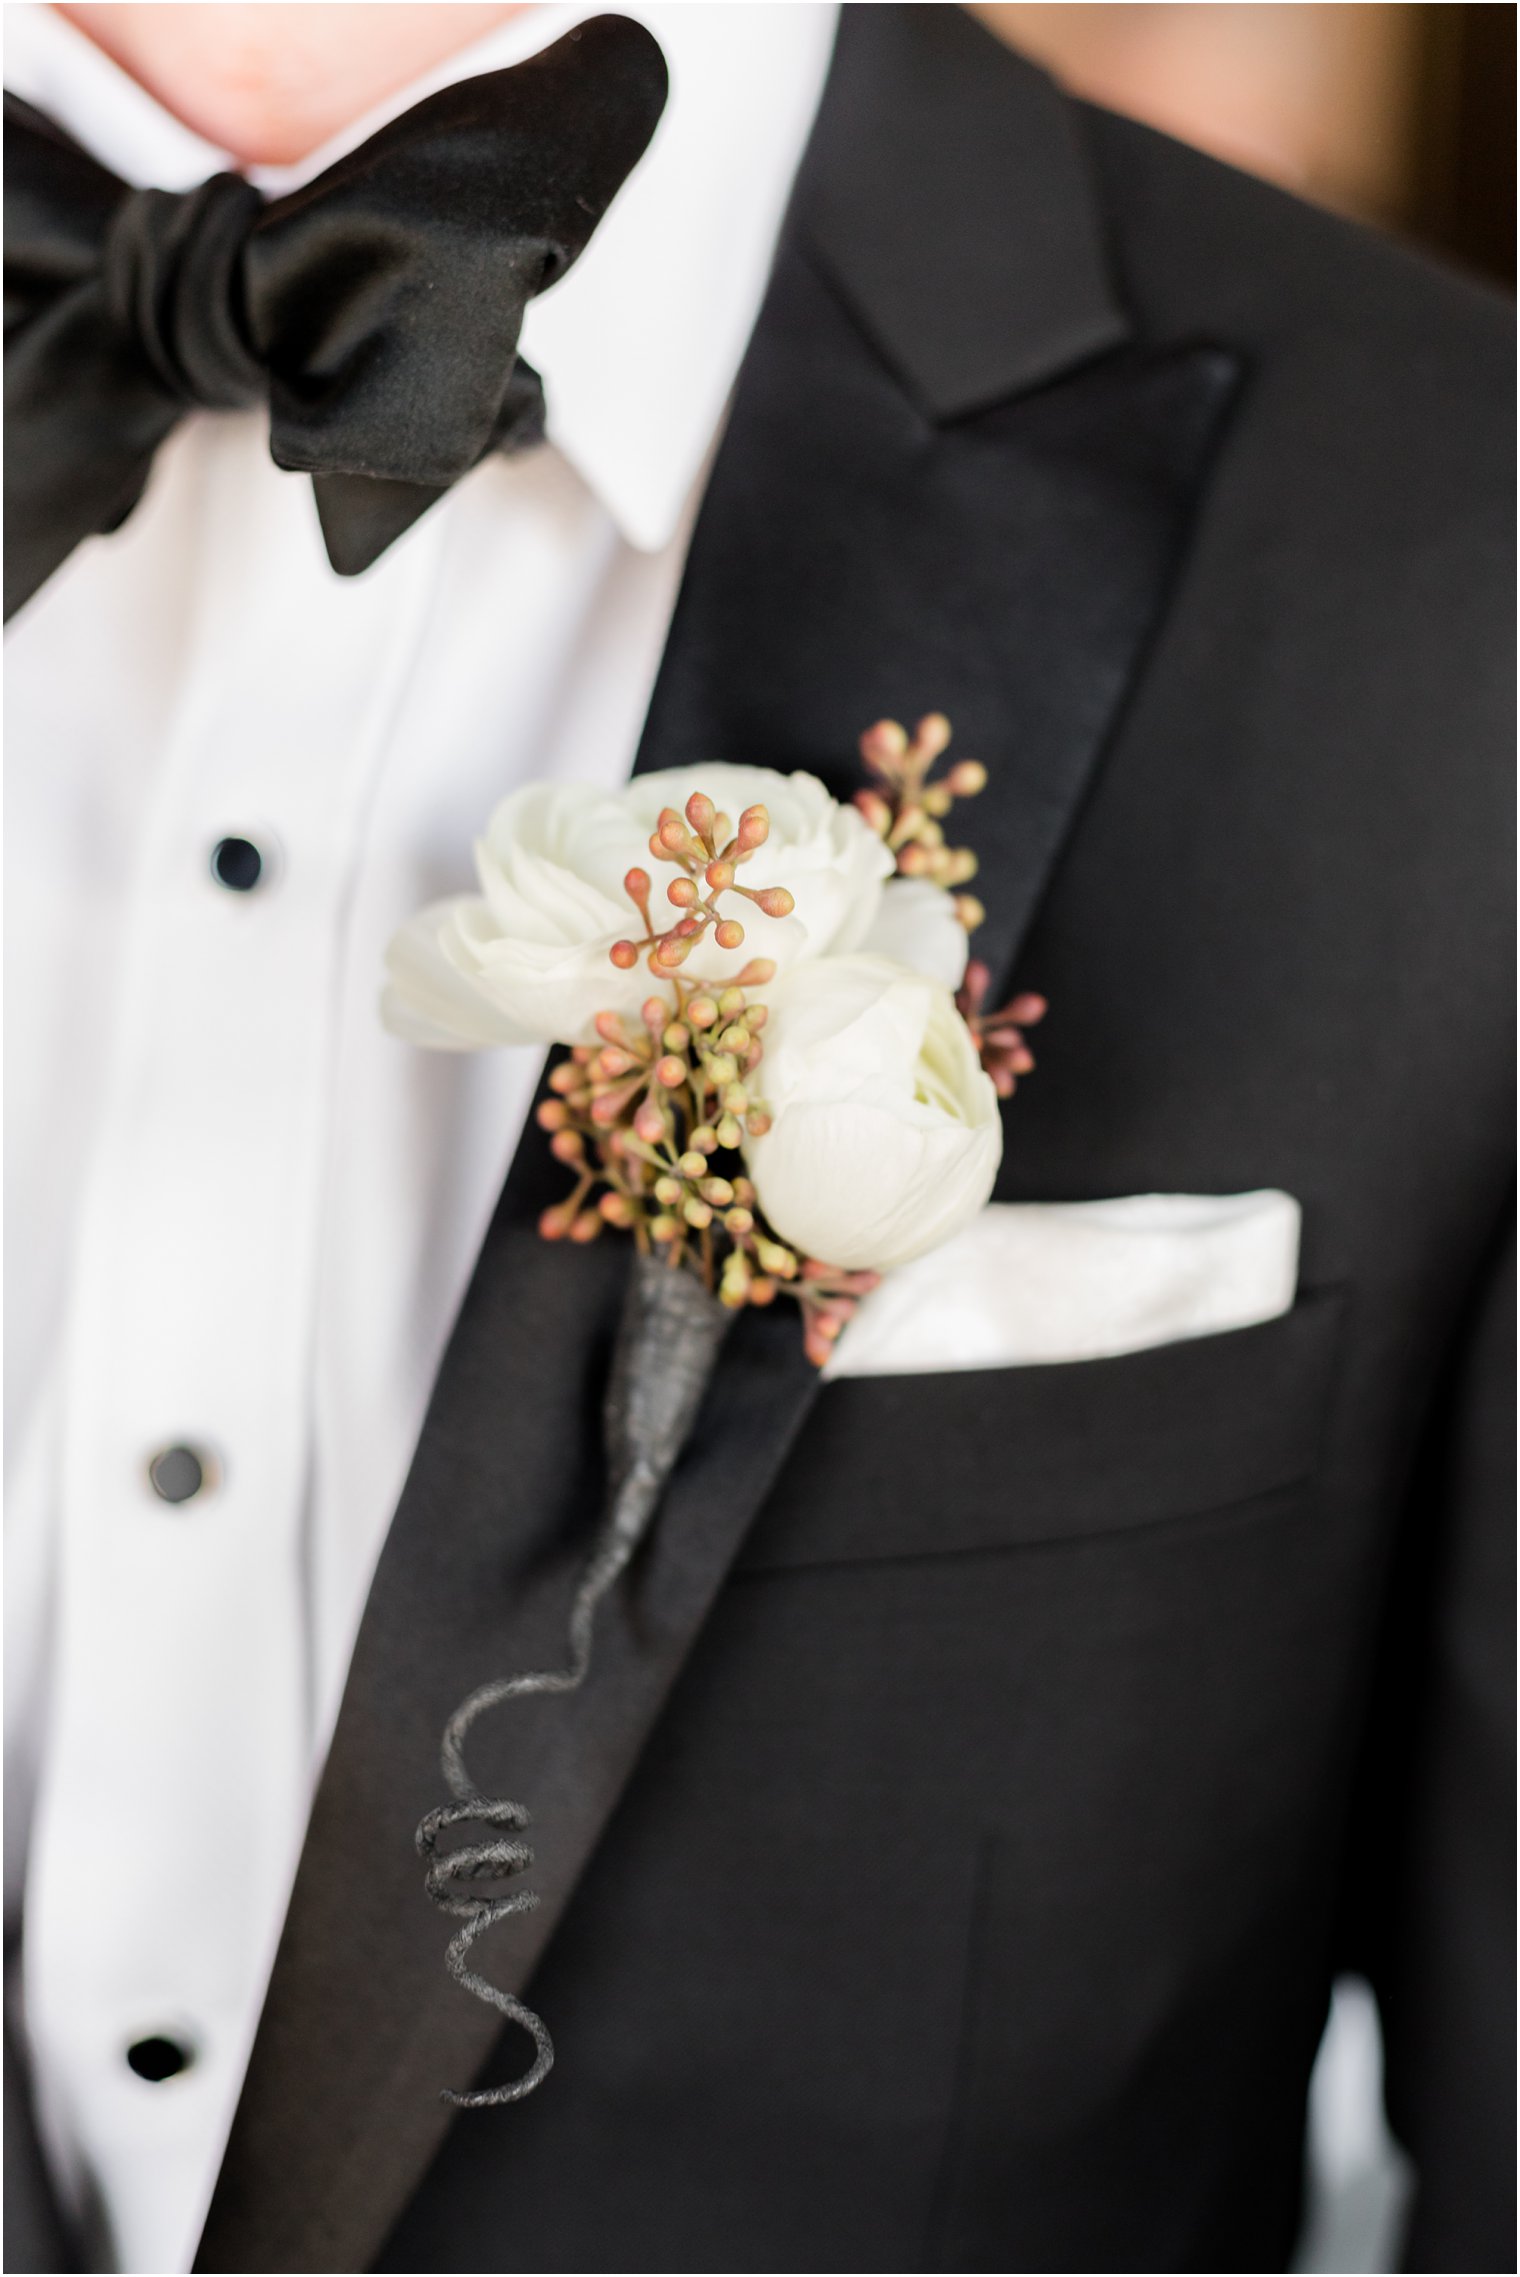 groom's white boutonniere for winter wedding day 